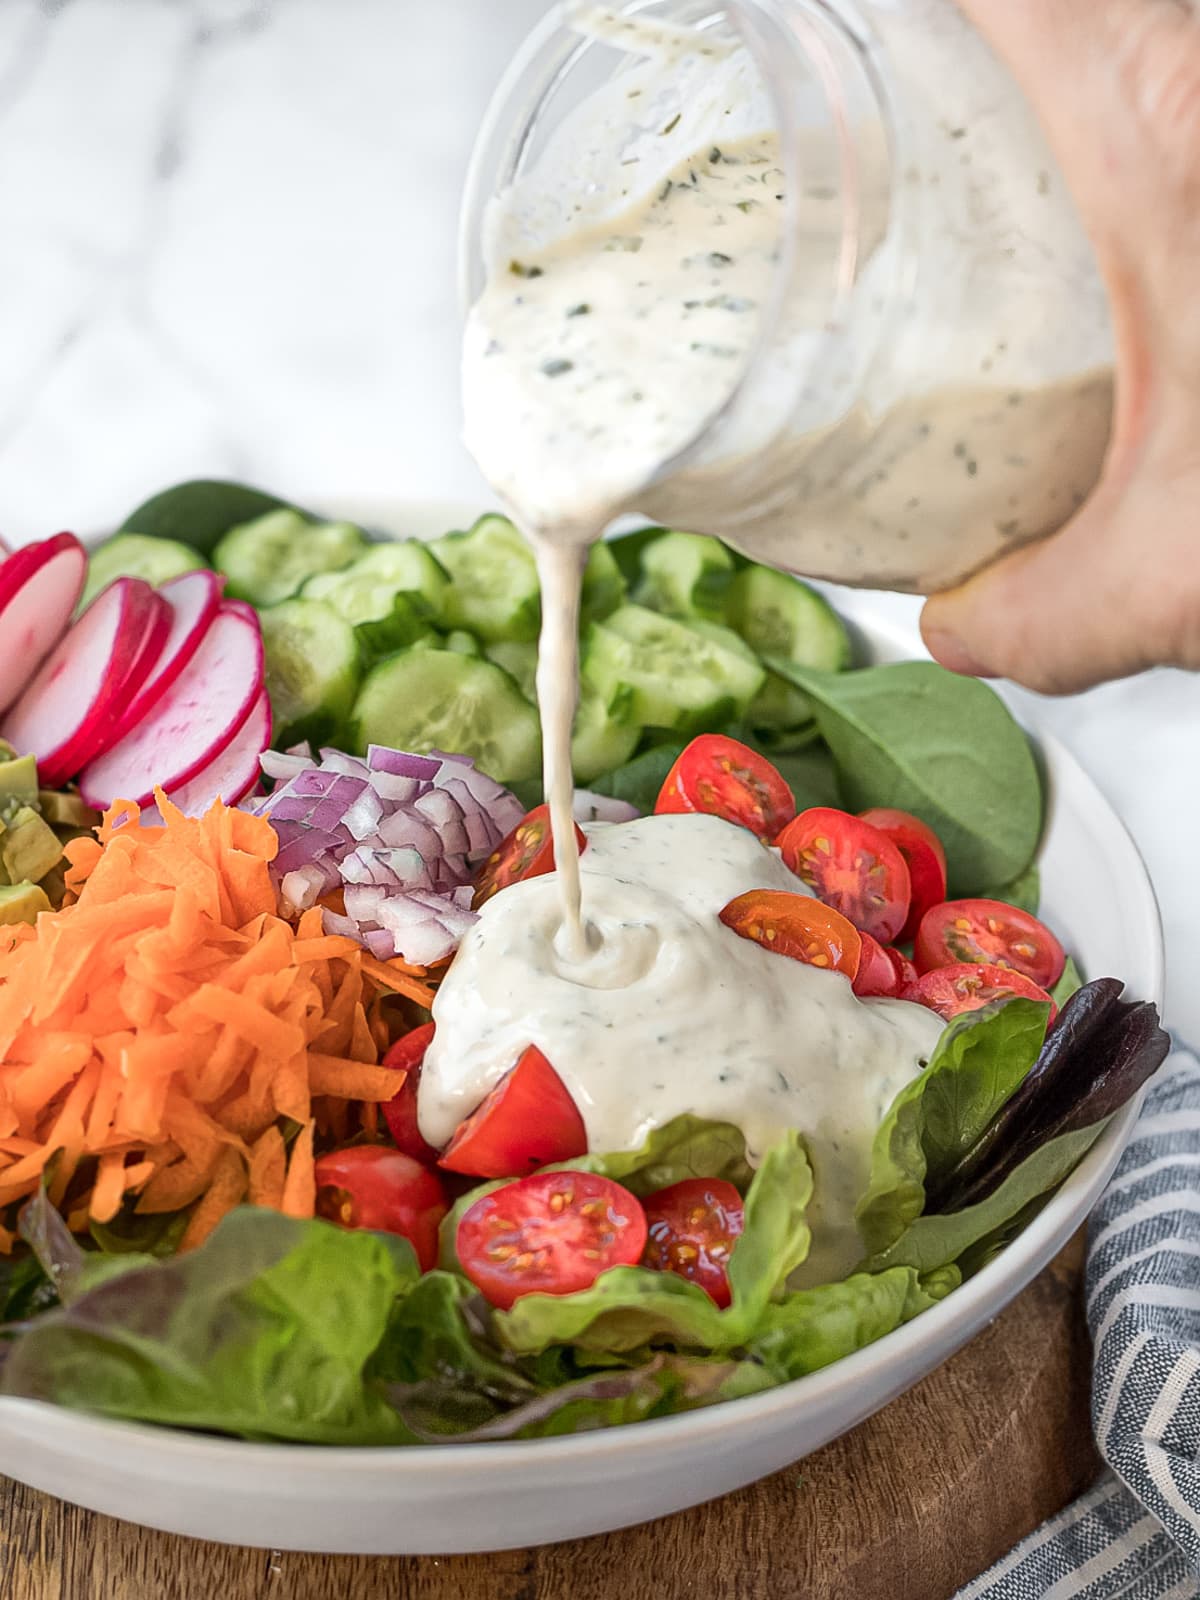 Ranch dressing being poured onto a garden salad.